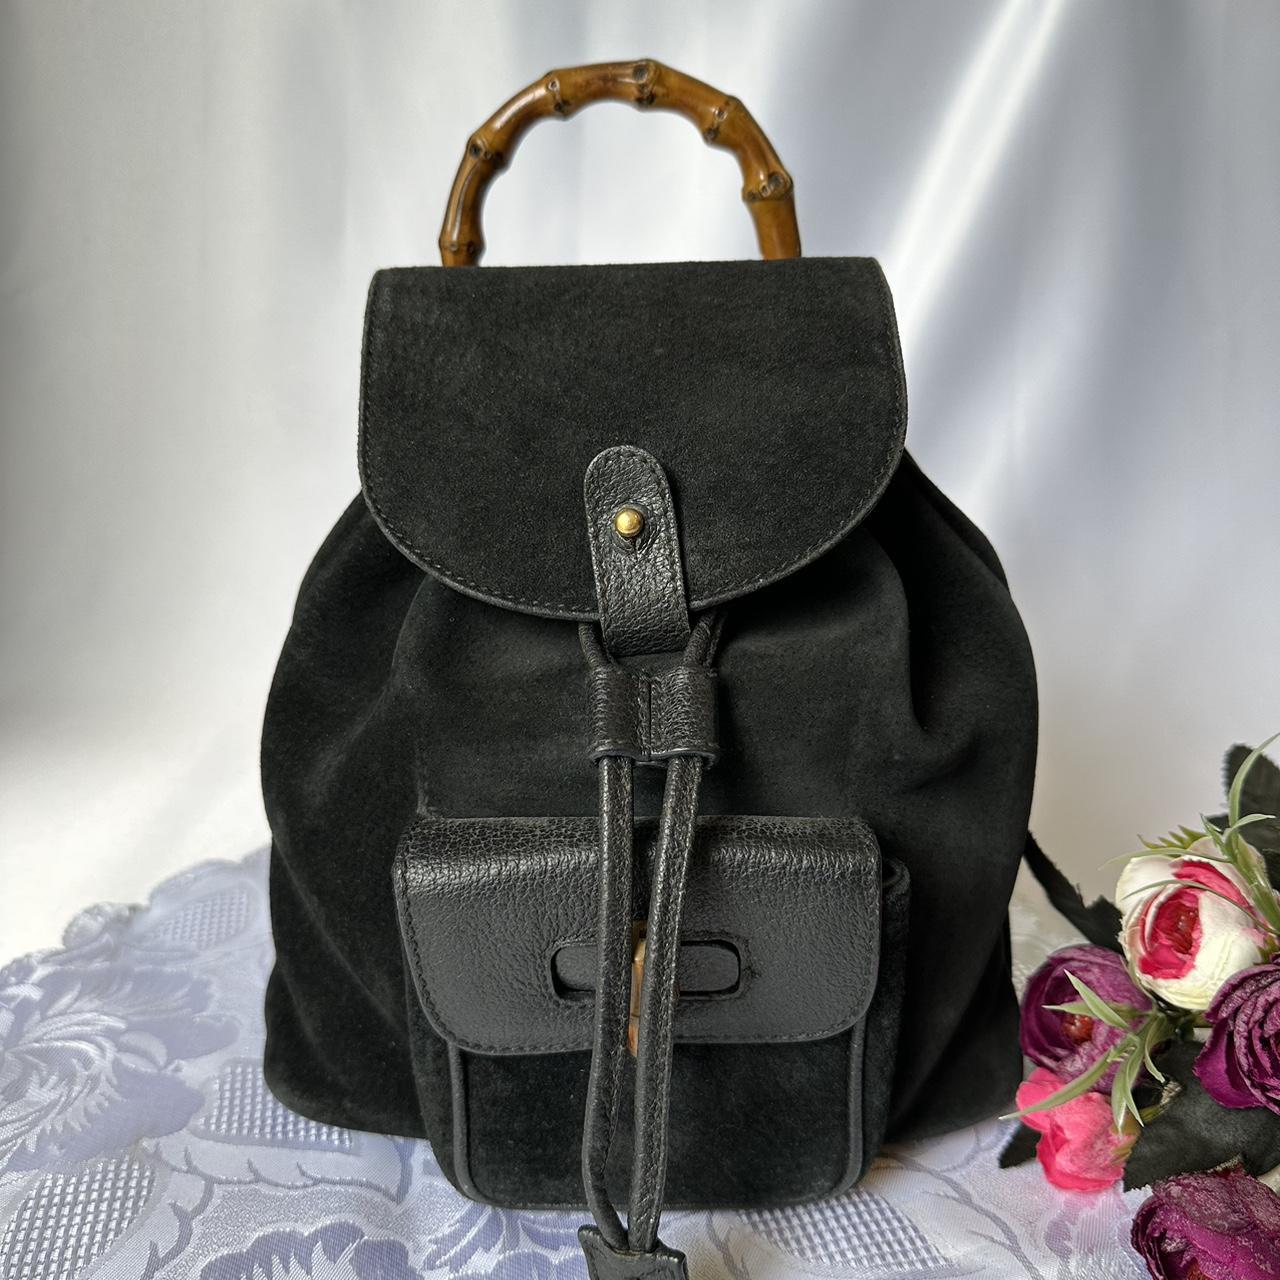 Leather Backpacks for sale in Quay, Oklahoma | Facebook Marketplace |  Facebook